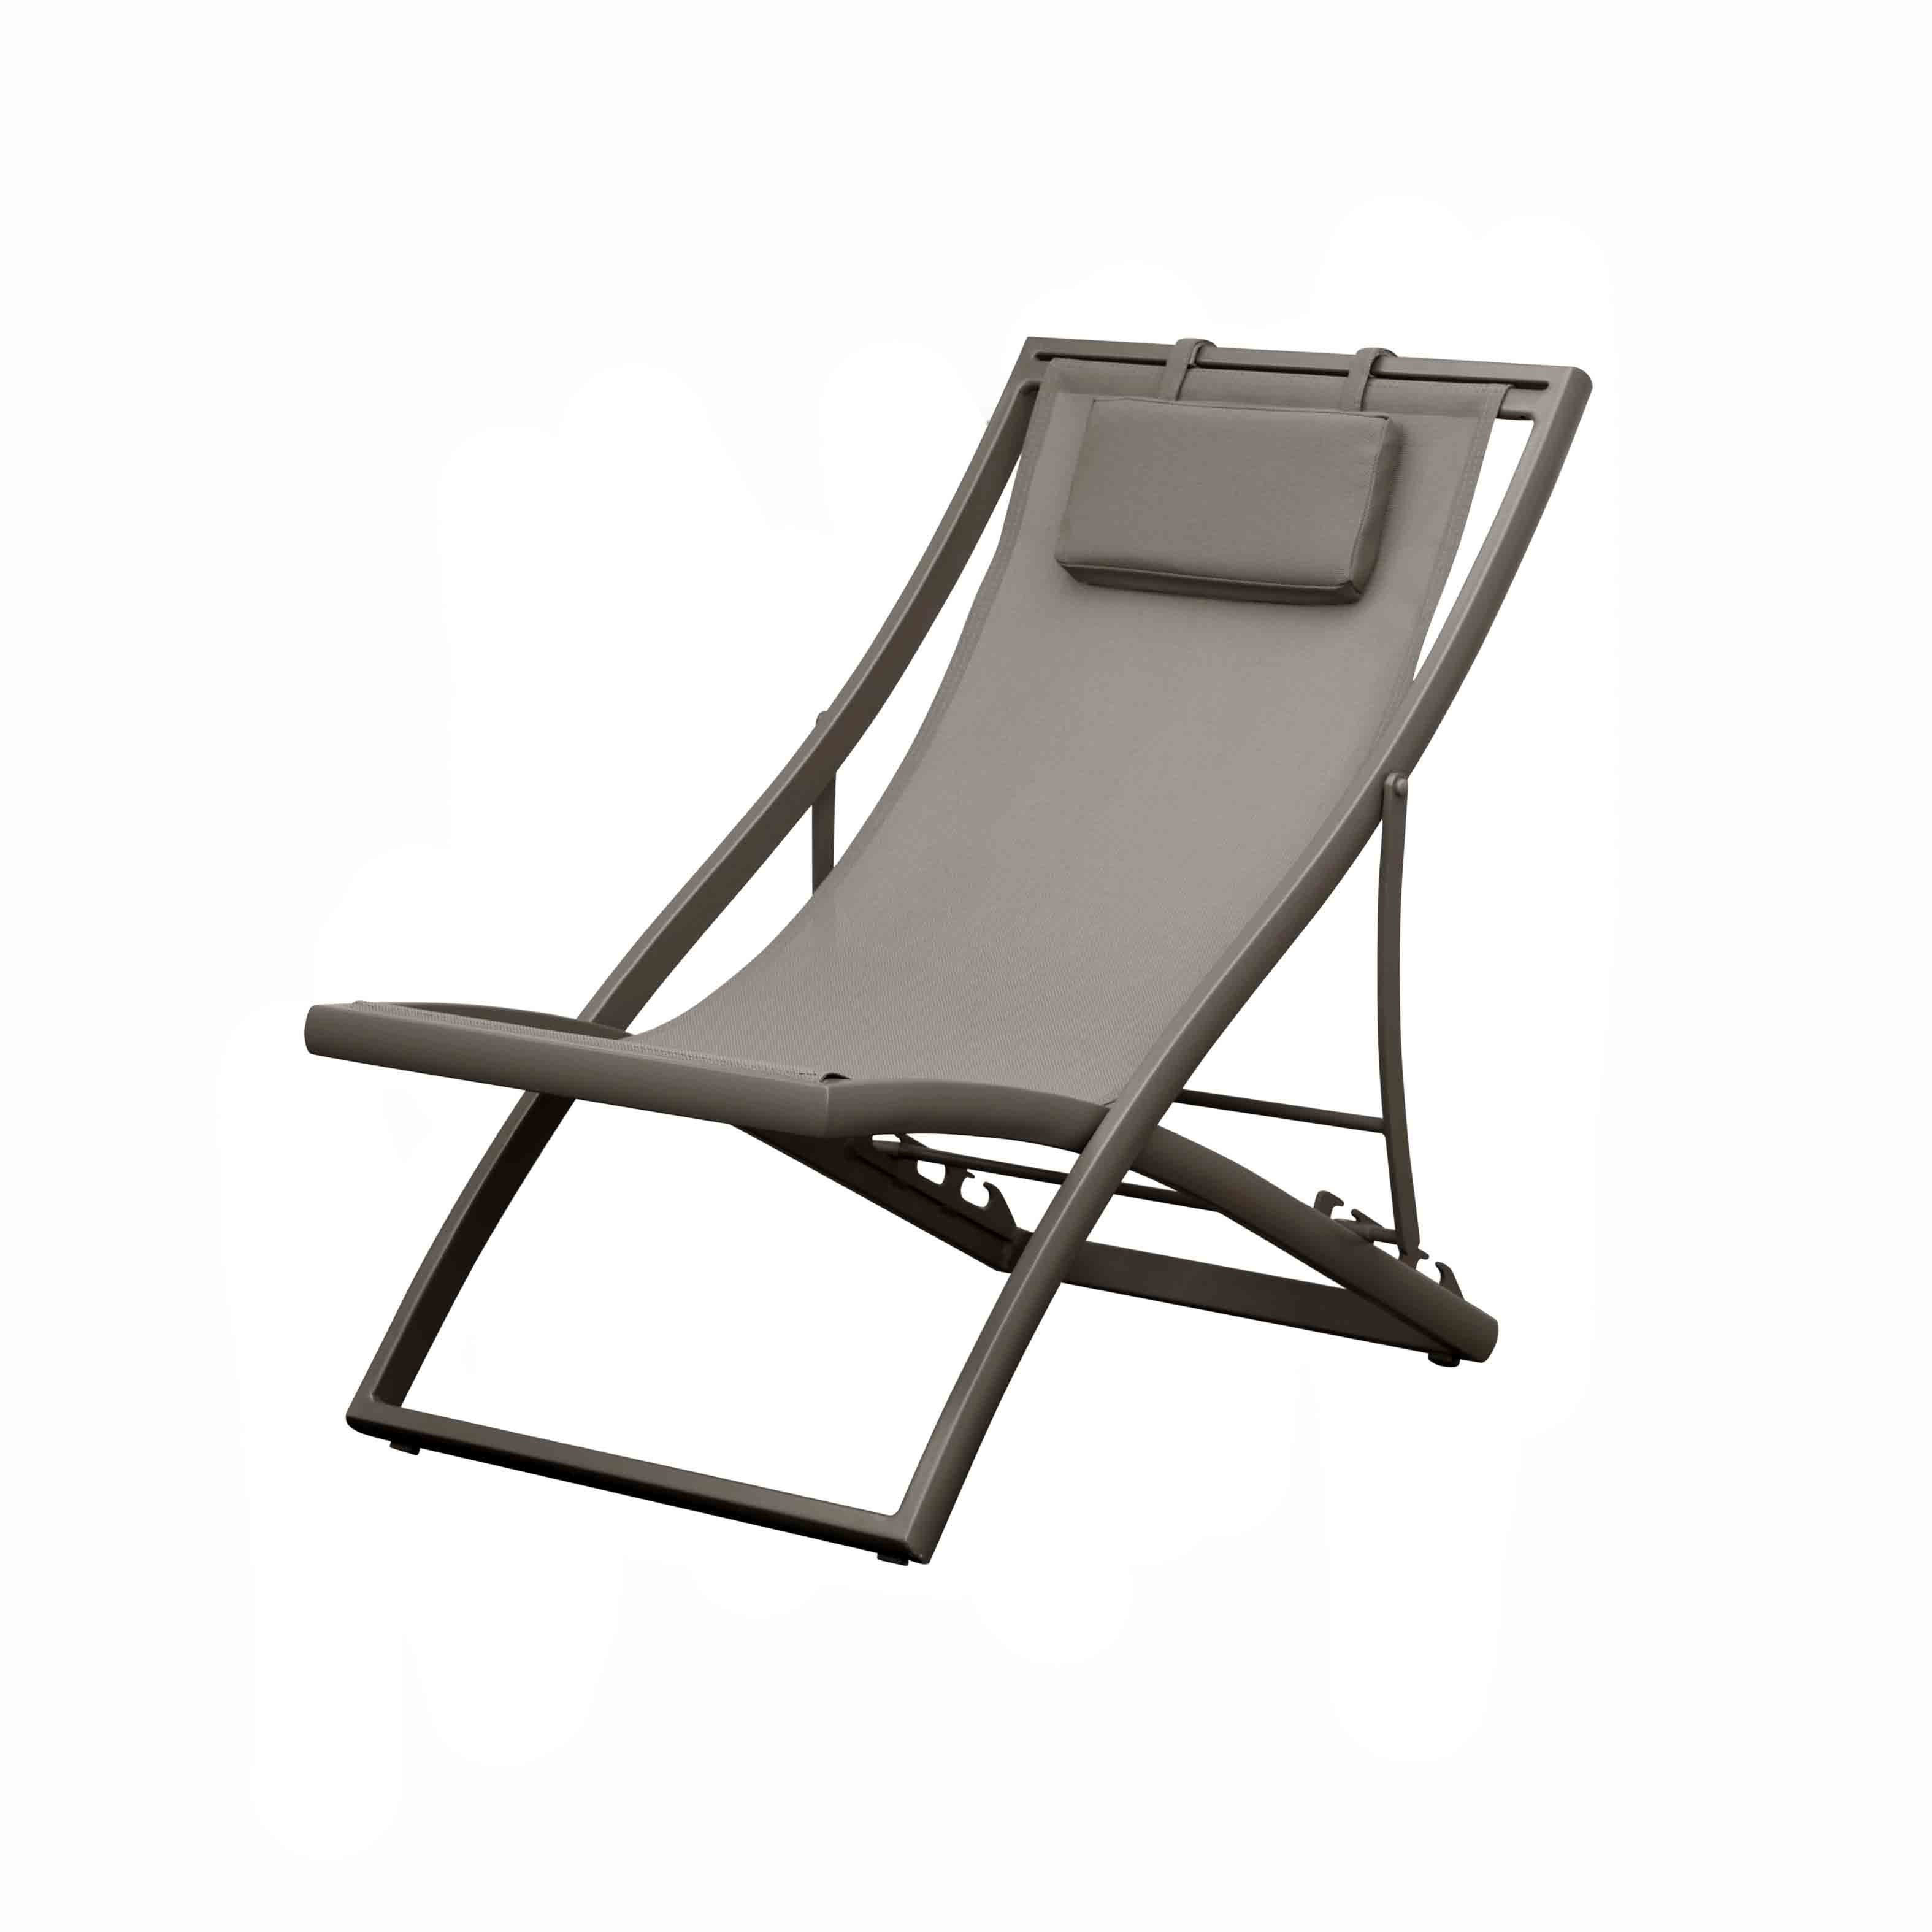 Tiffany sling relax chair S1